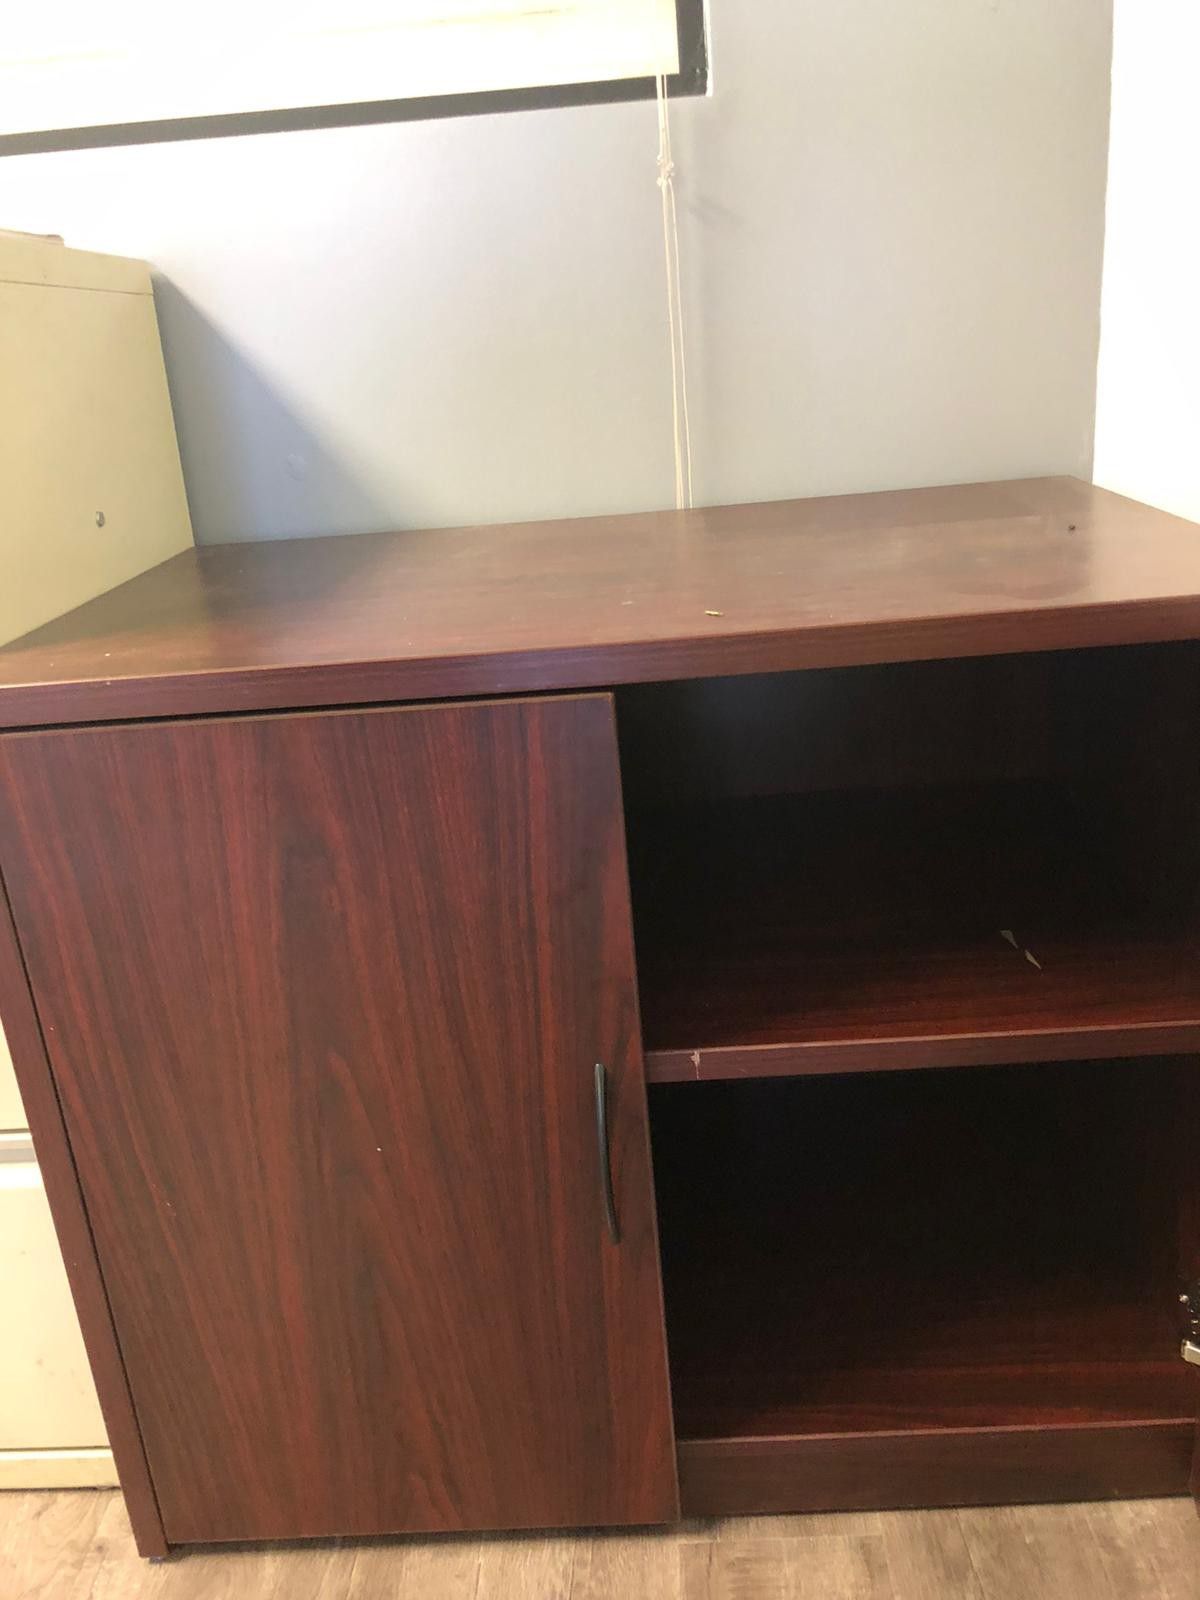 GREAT BUY-Desk, Office Furniture and Supplies